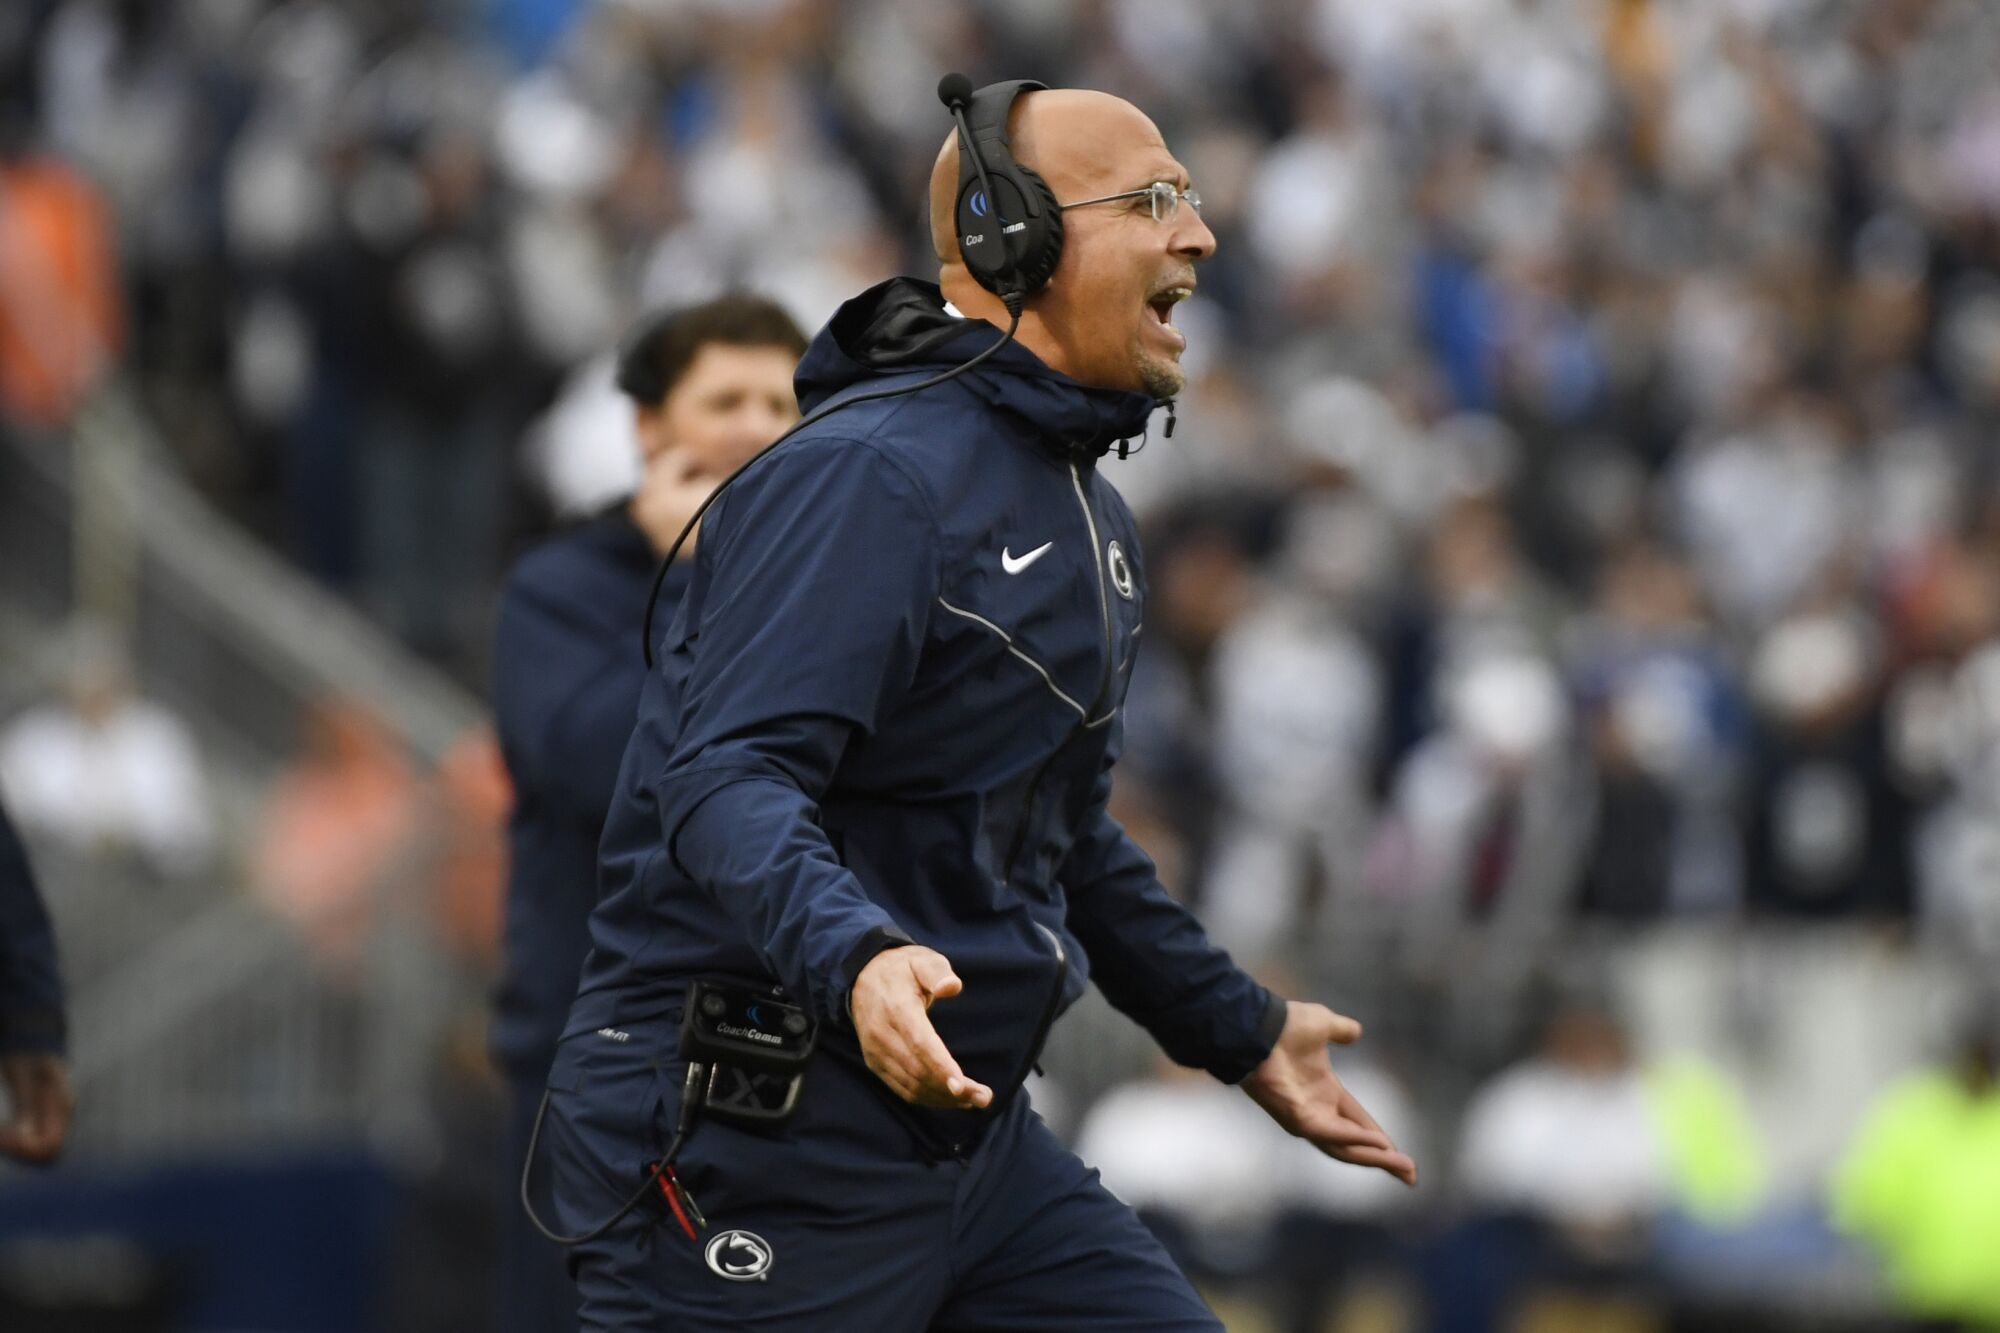 Penn State coach James Franklin reacts to a call during his team's loss to Illinois